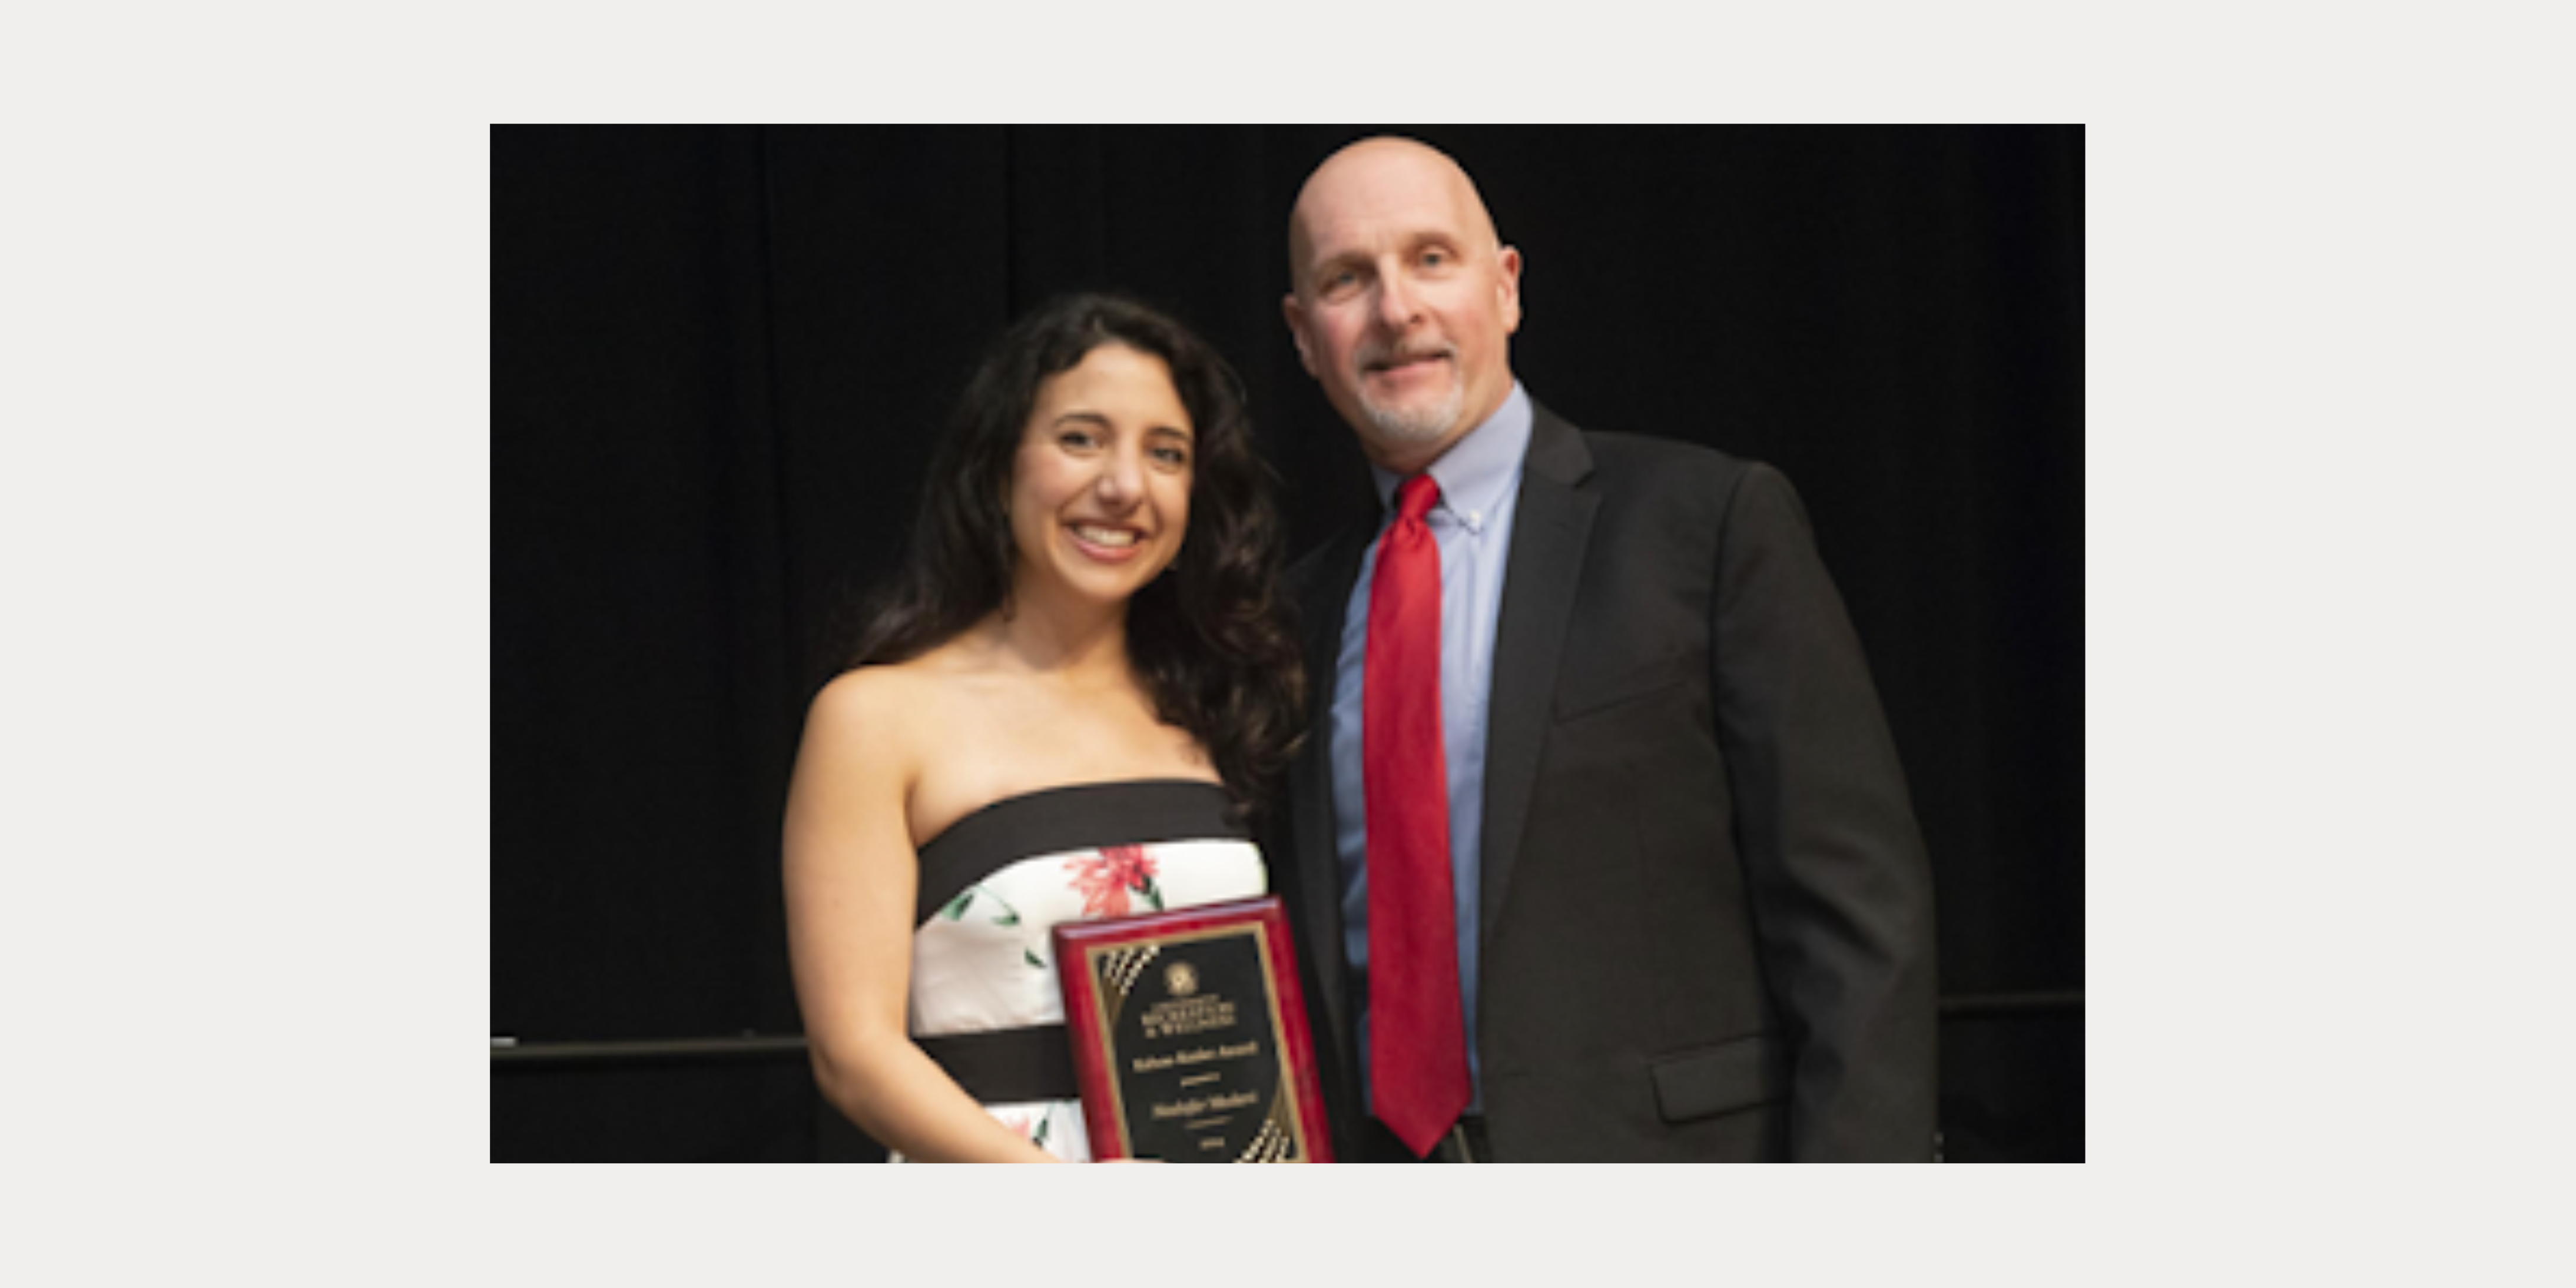 Woman student smiles as she poses with award with man in a suit. 